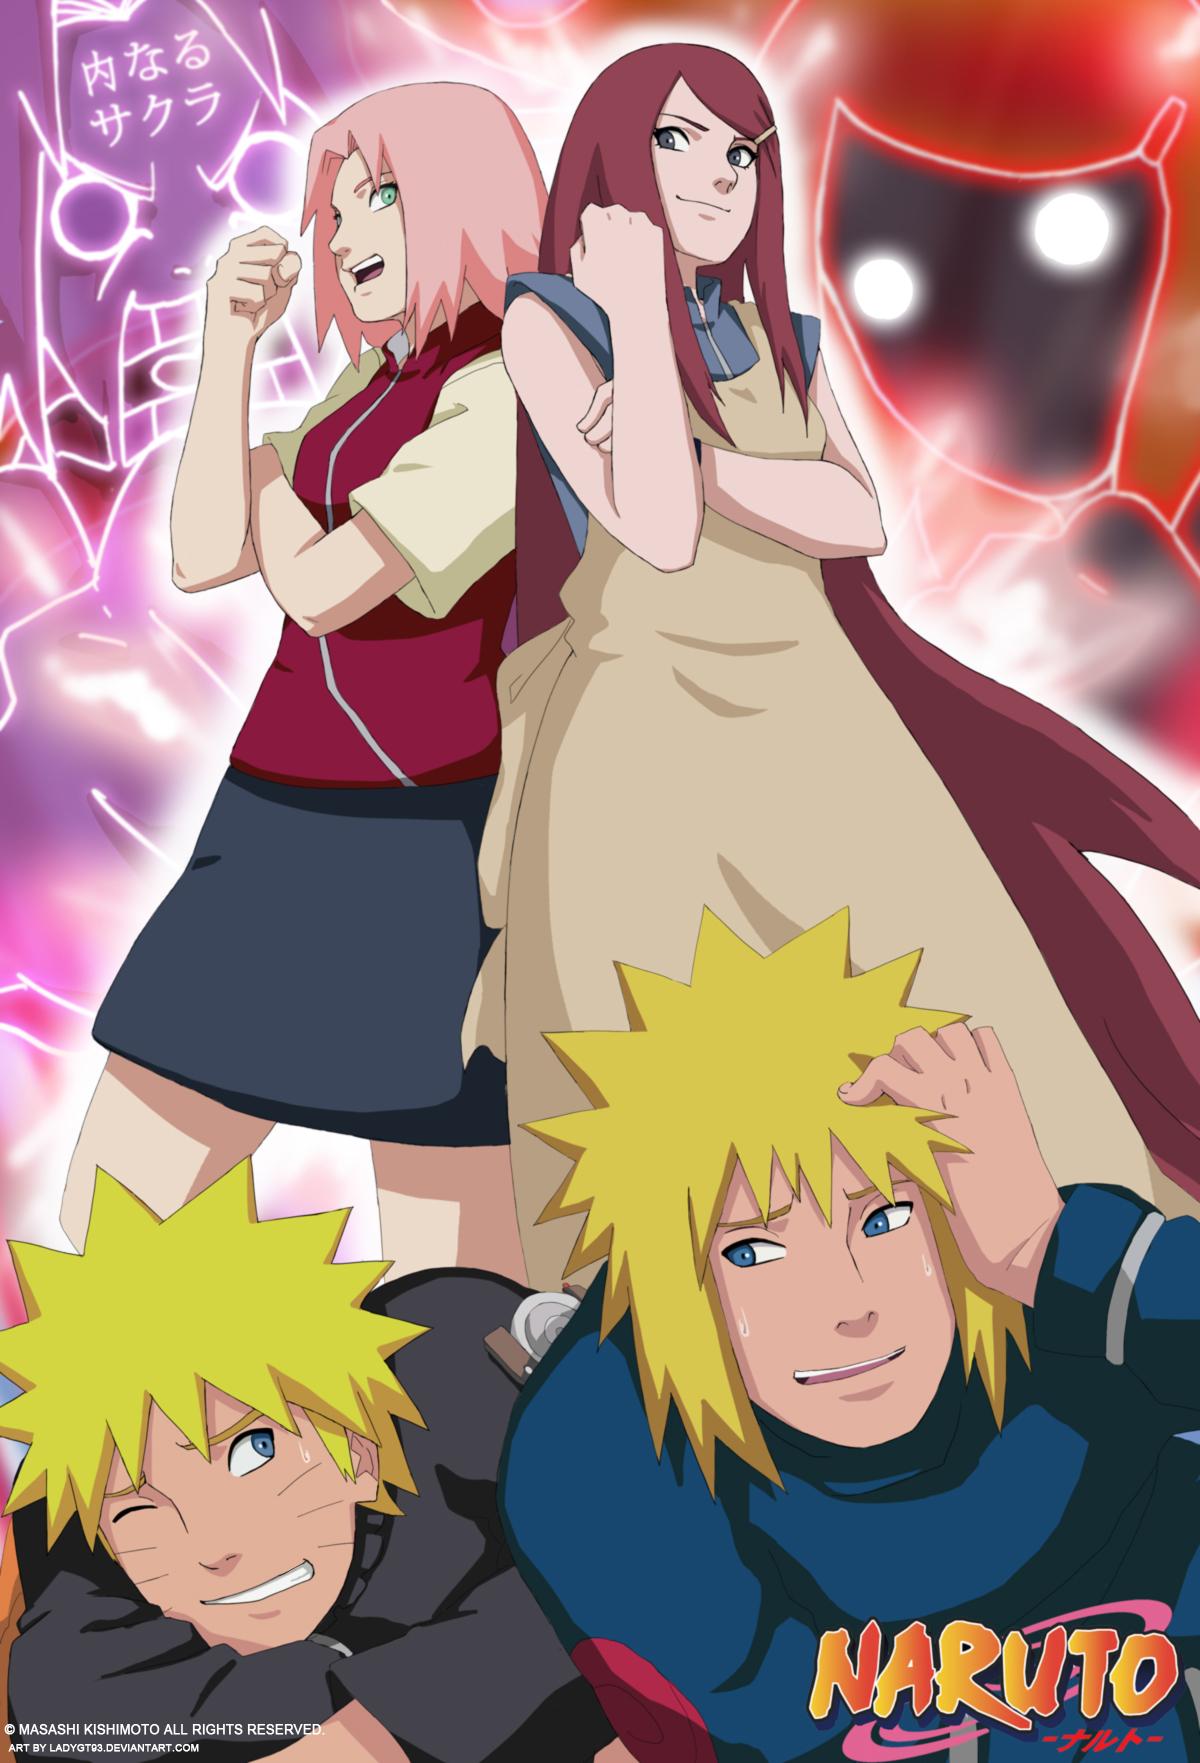 Naruto_Poster_01_by_ladygt93